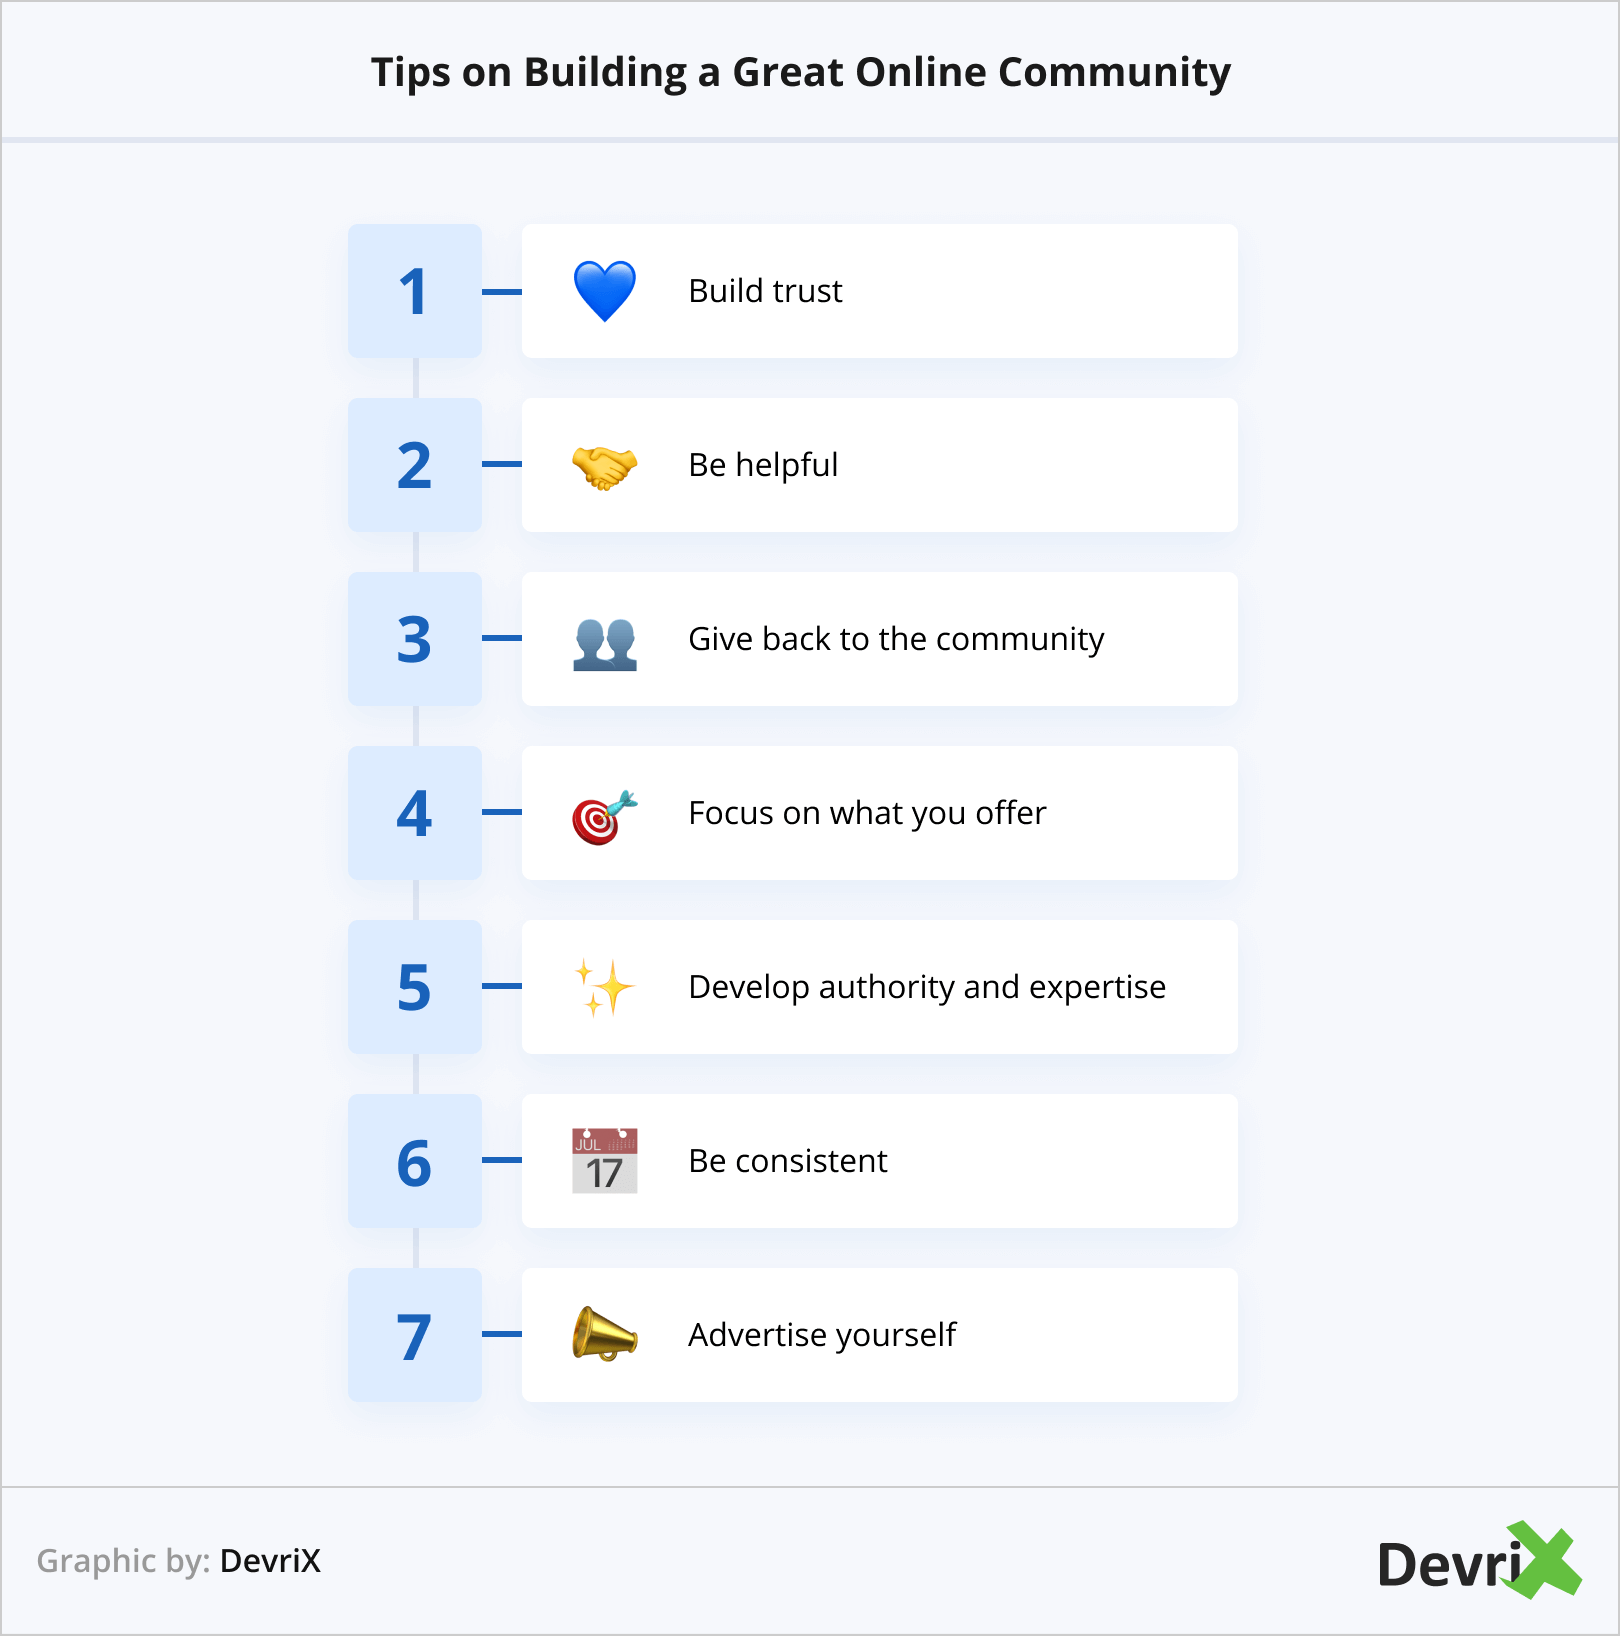 Tips on Building a Great Online Community